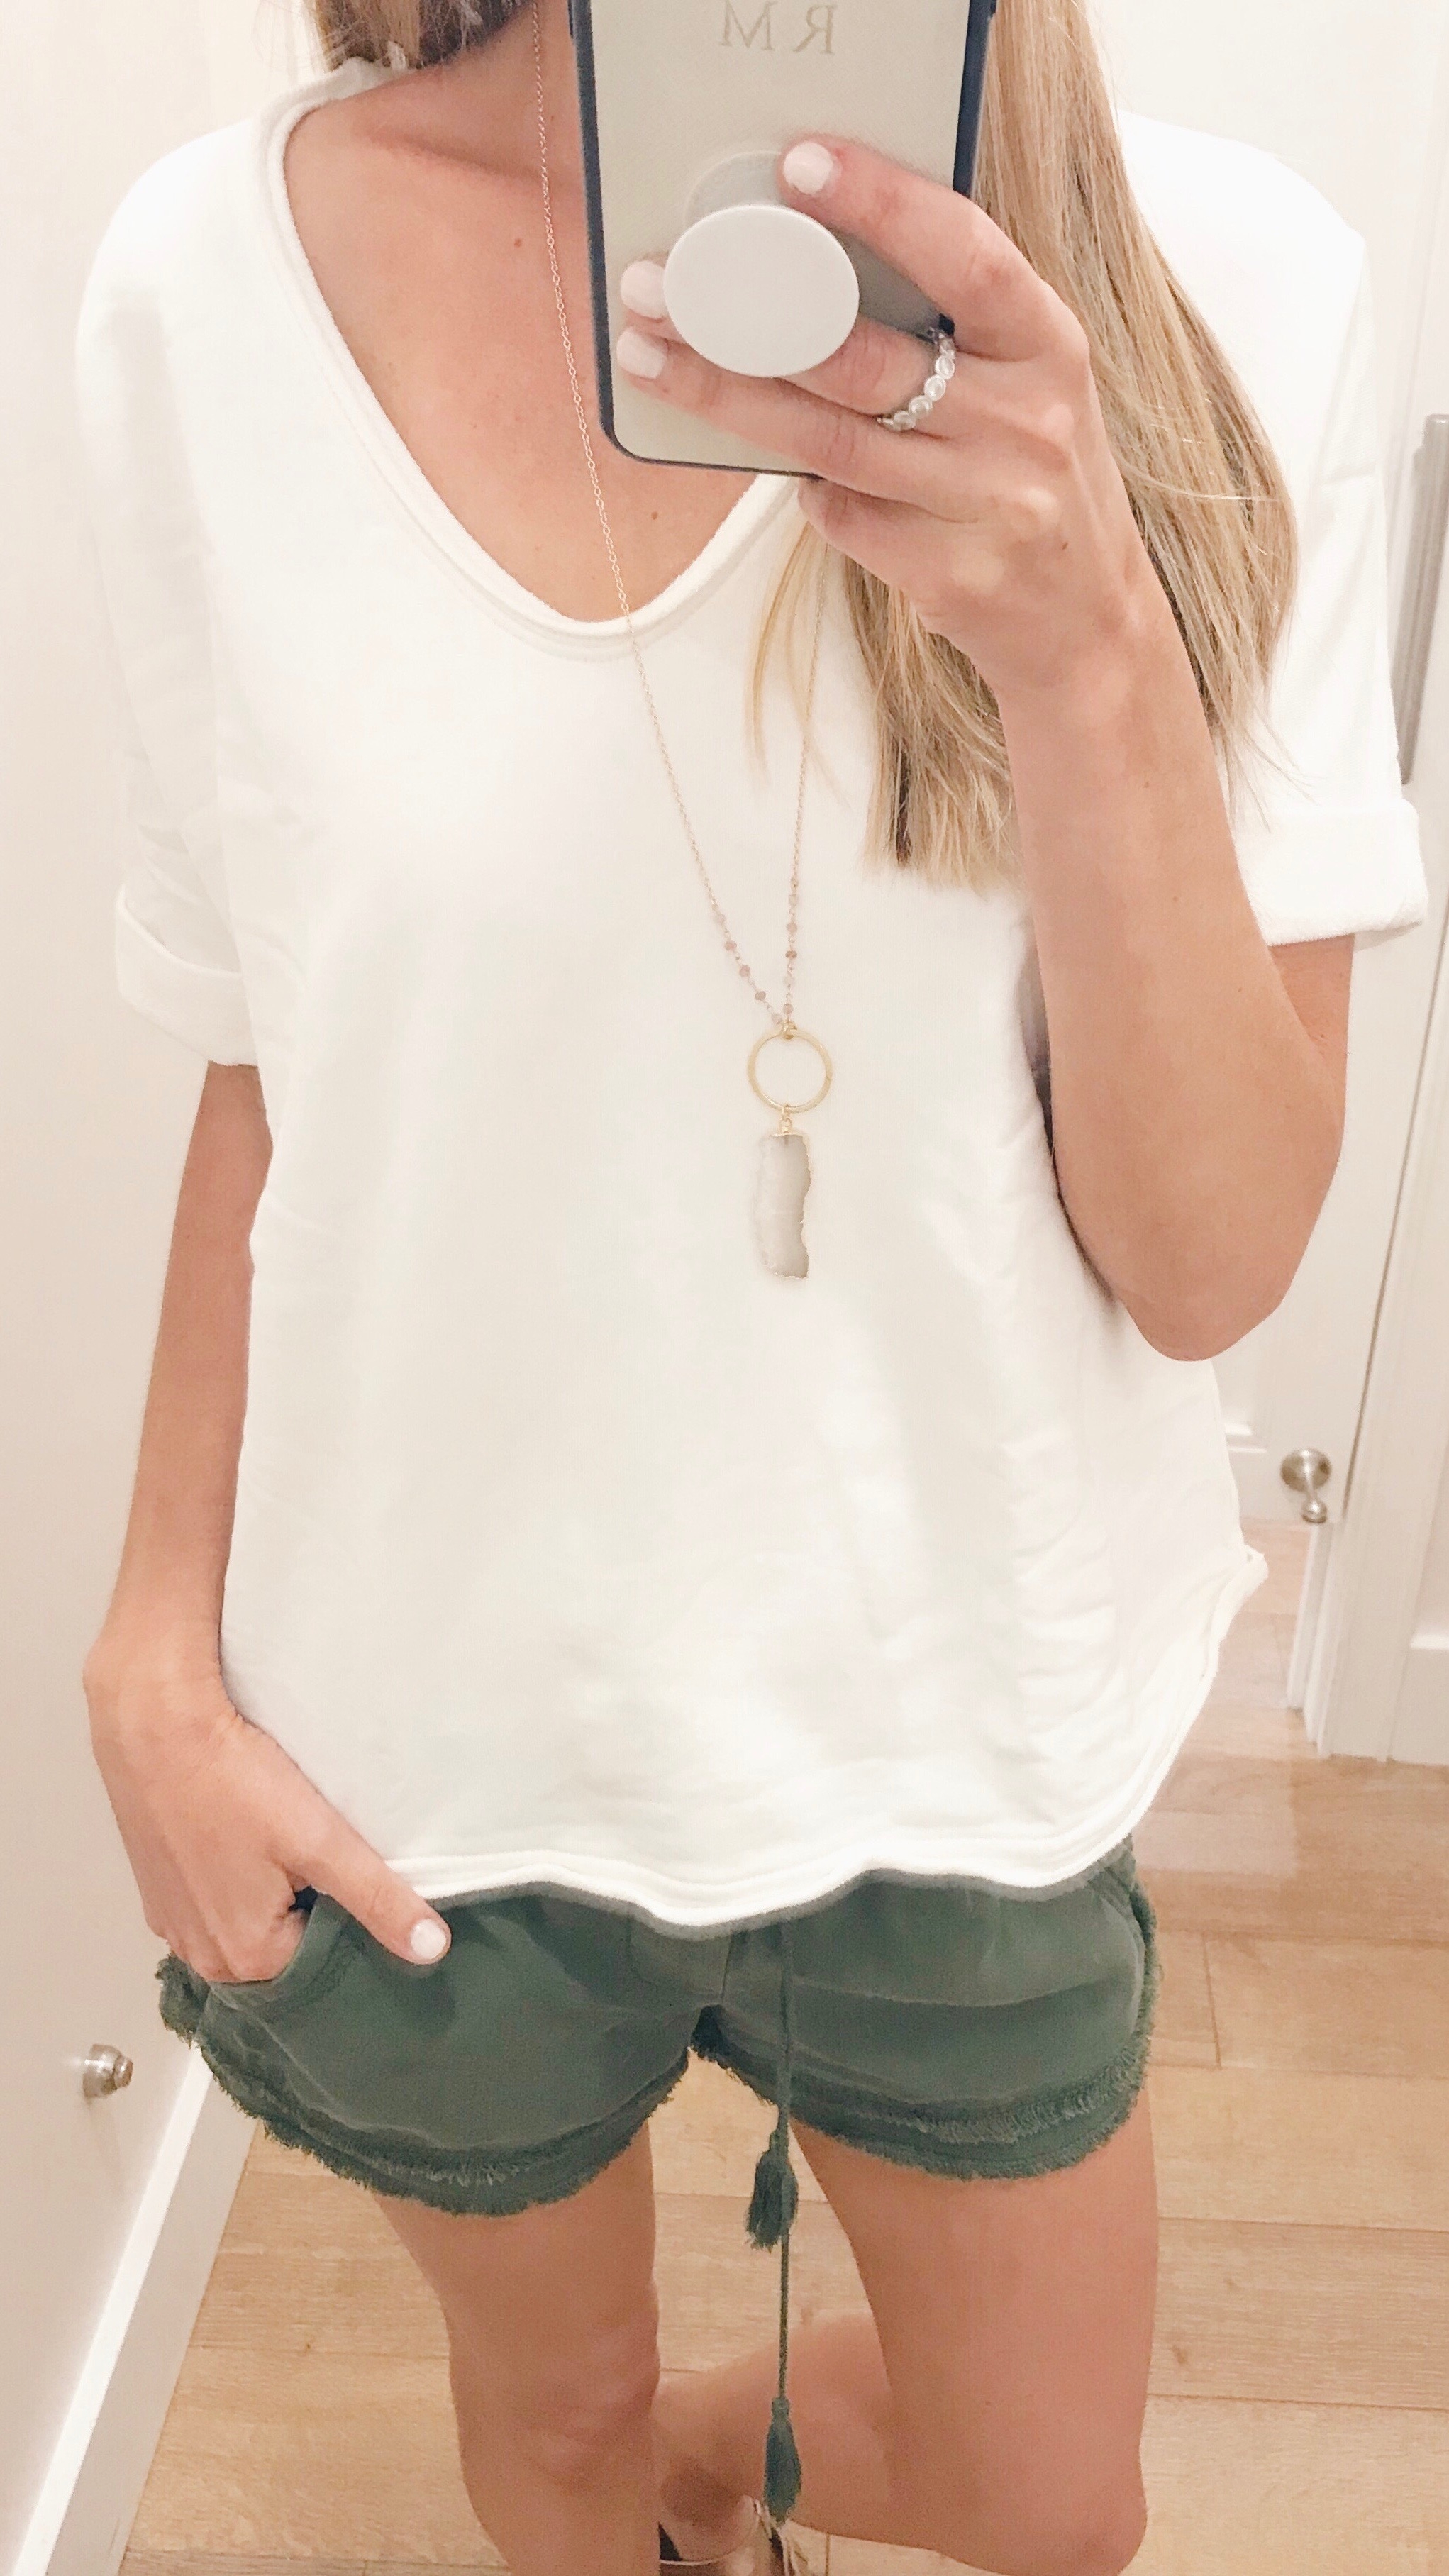 4th of July LOFT Sale - Tshirt Sweater/Olive Green Shorts